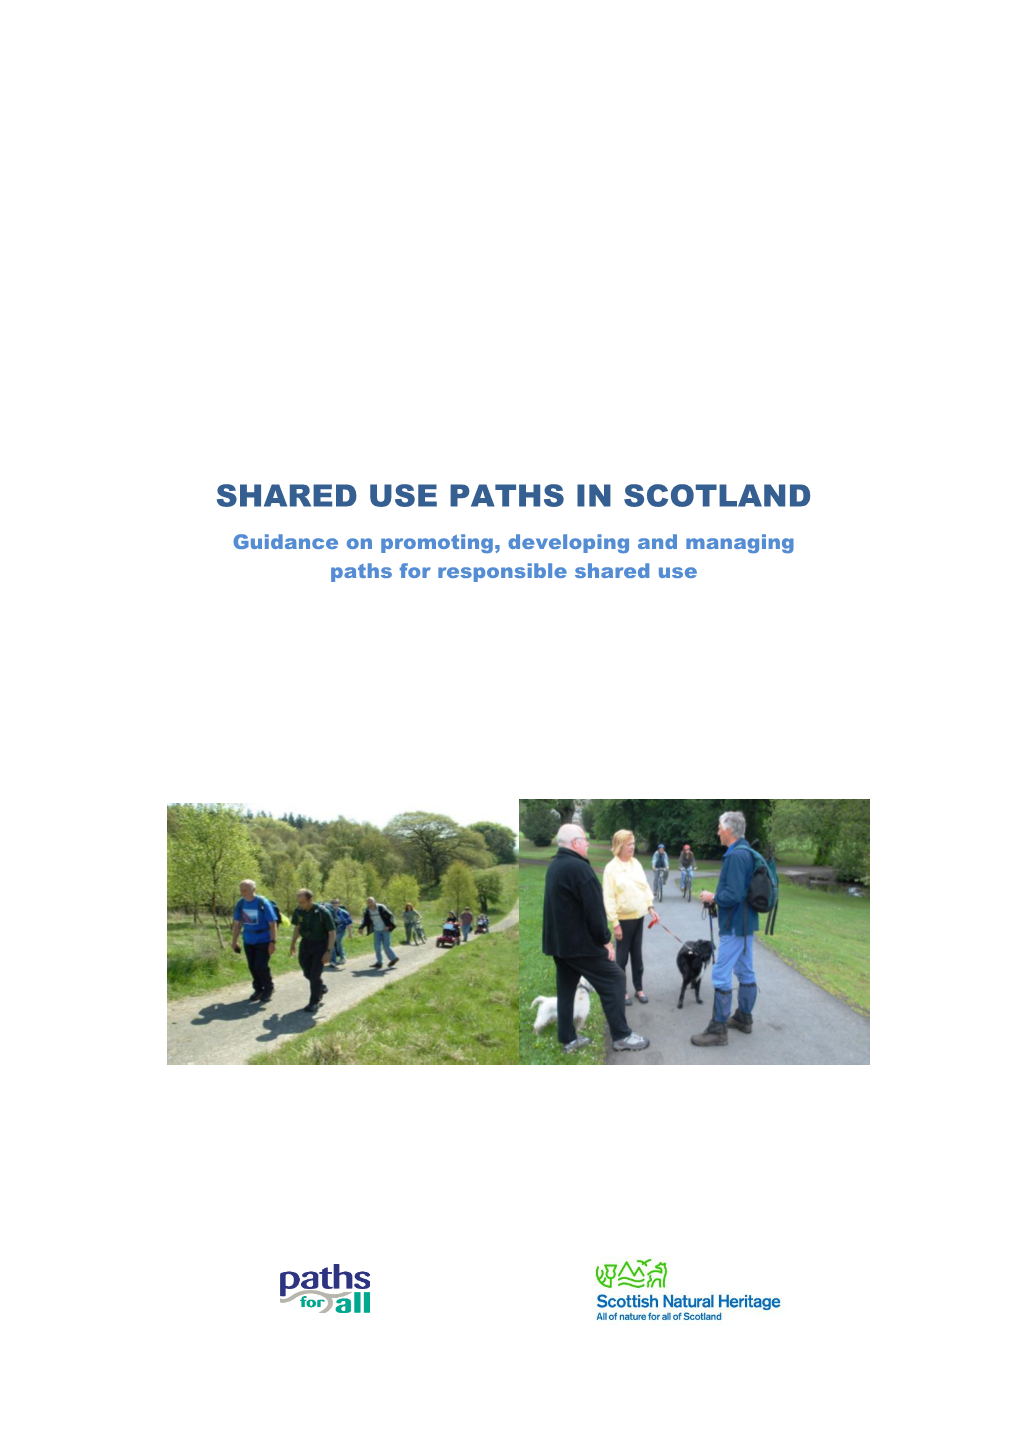 SHARED USE PATHS in SCOTLAND Guidance on Promoting, Developing and Managing Paths for Responsible Shared Use